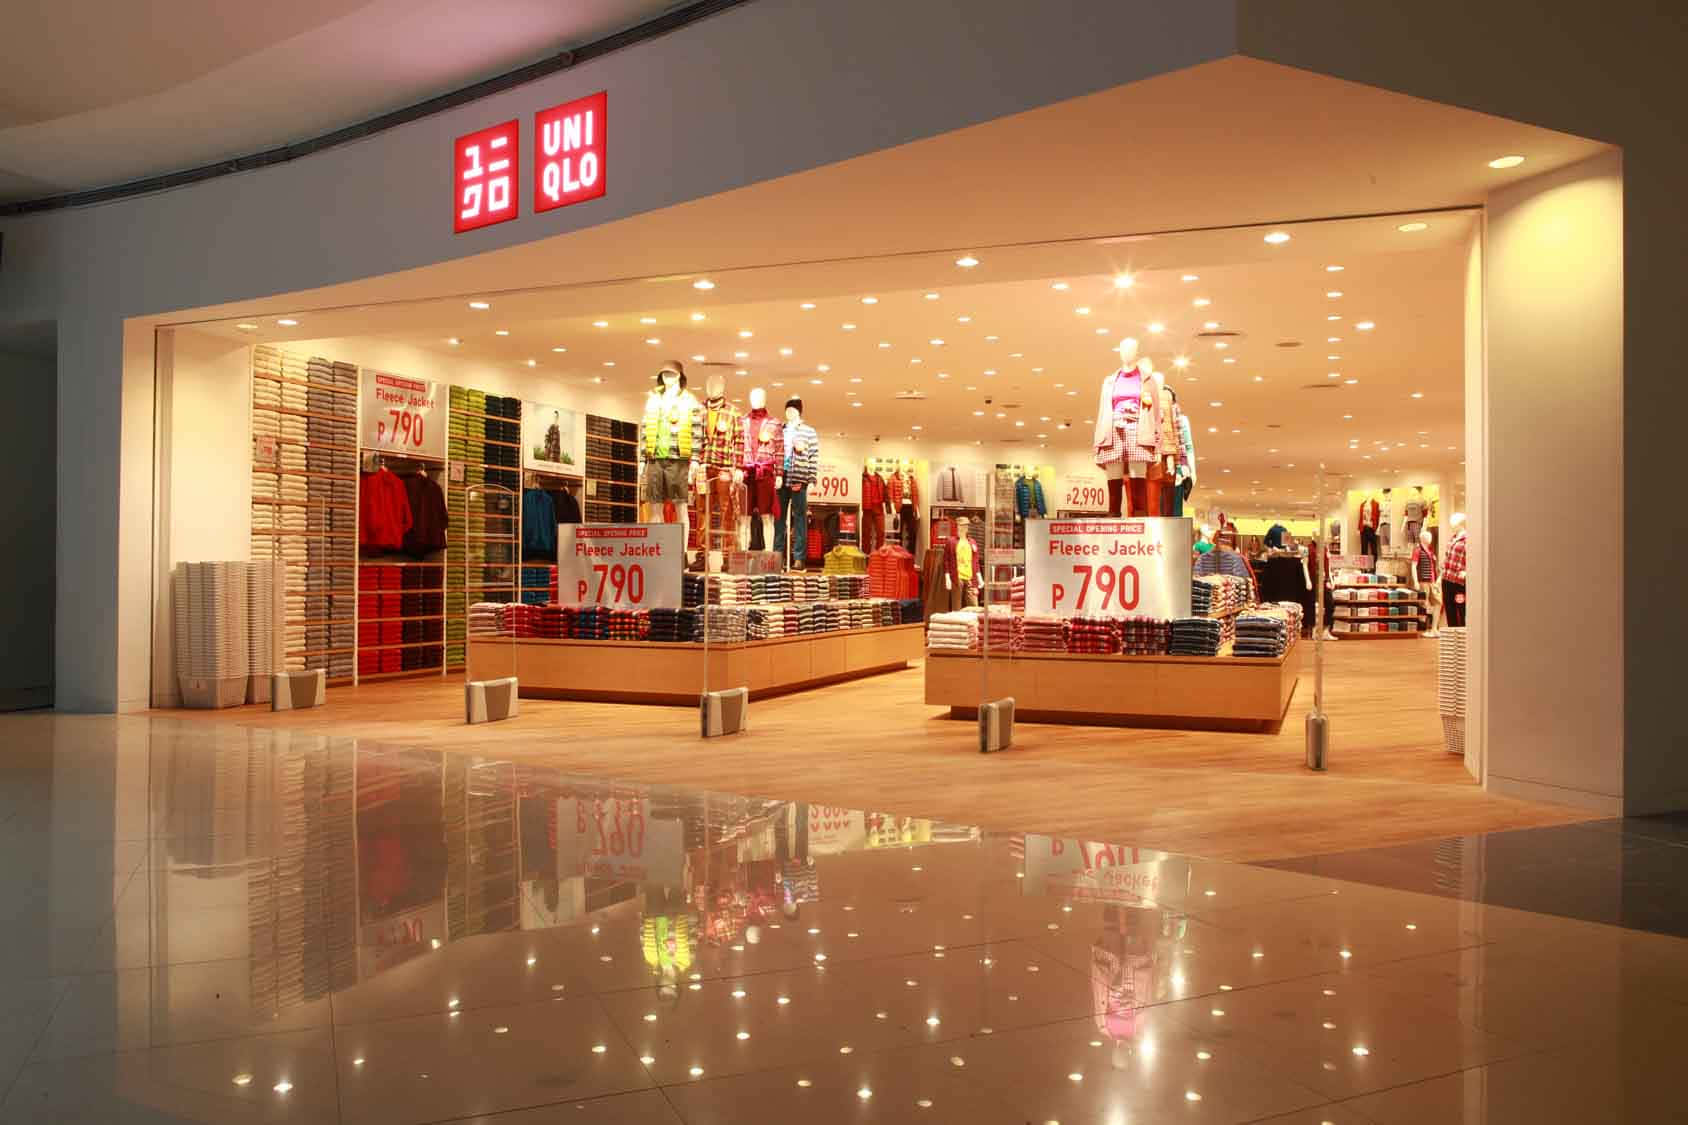 Enjoy stylish comfort for everyday with Uniqlo apparel